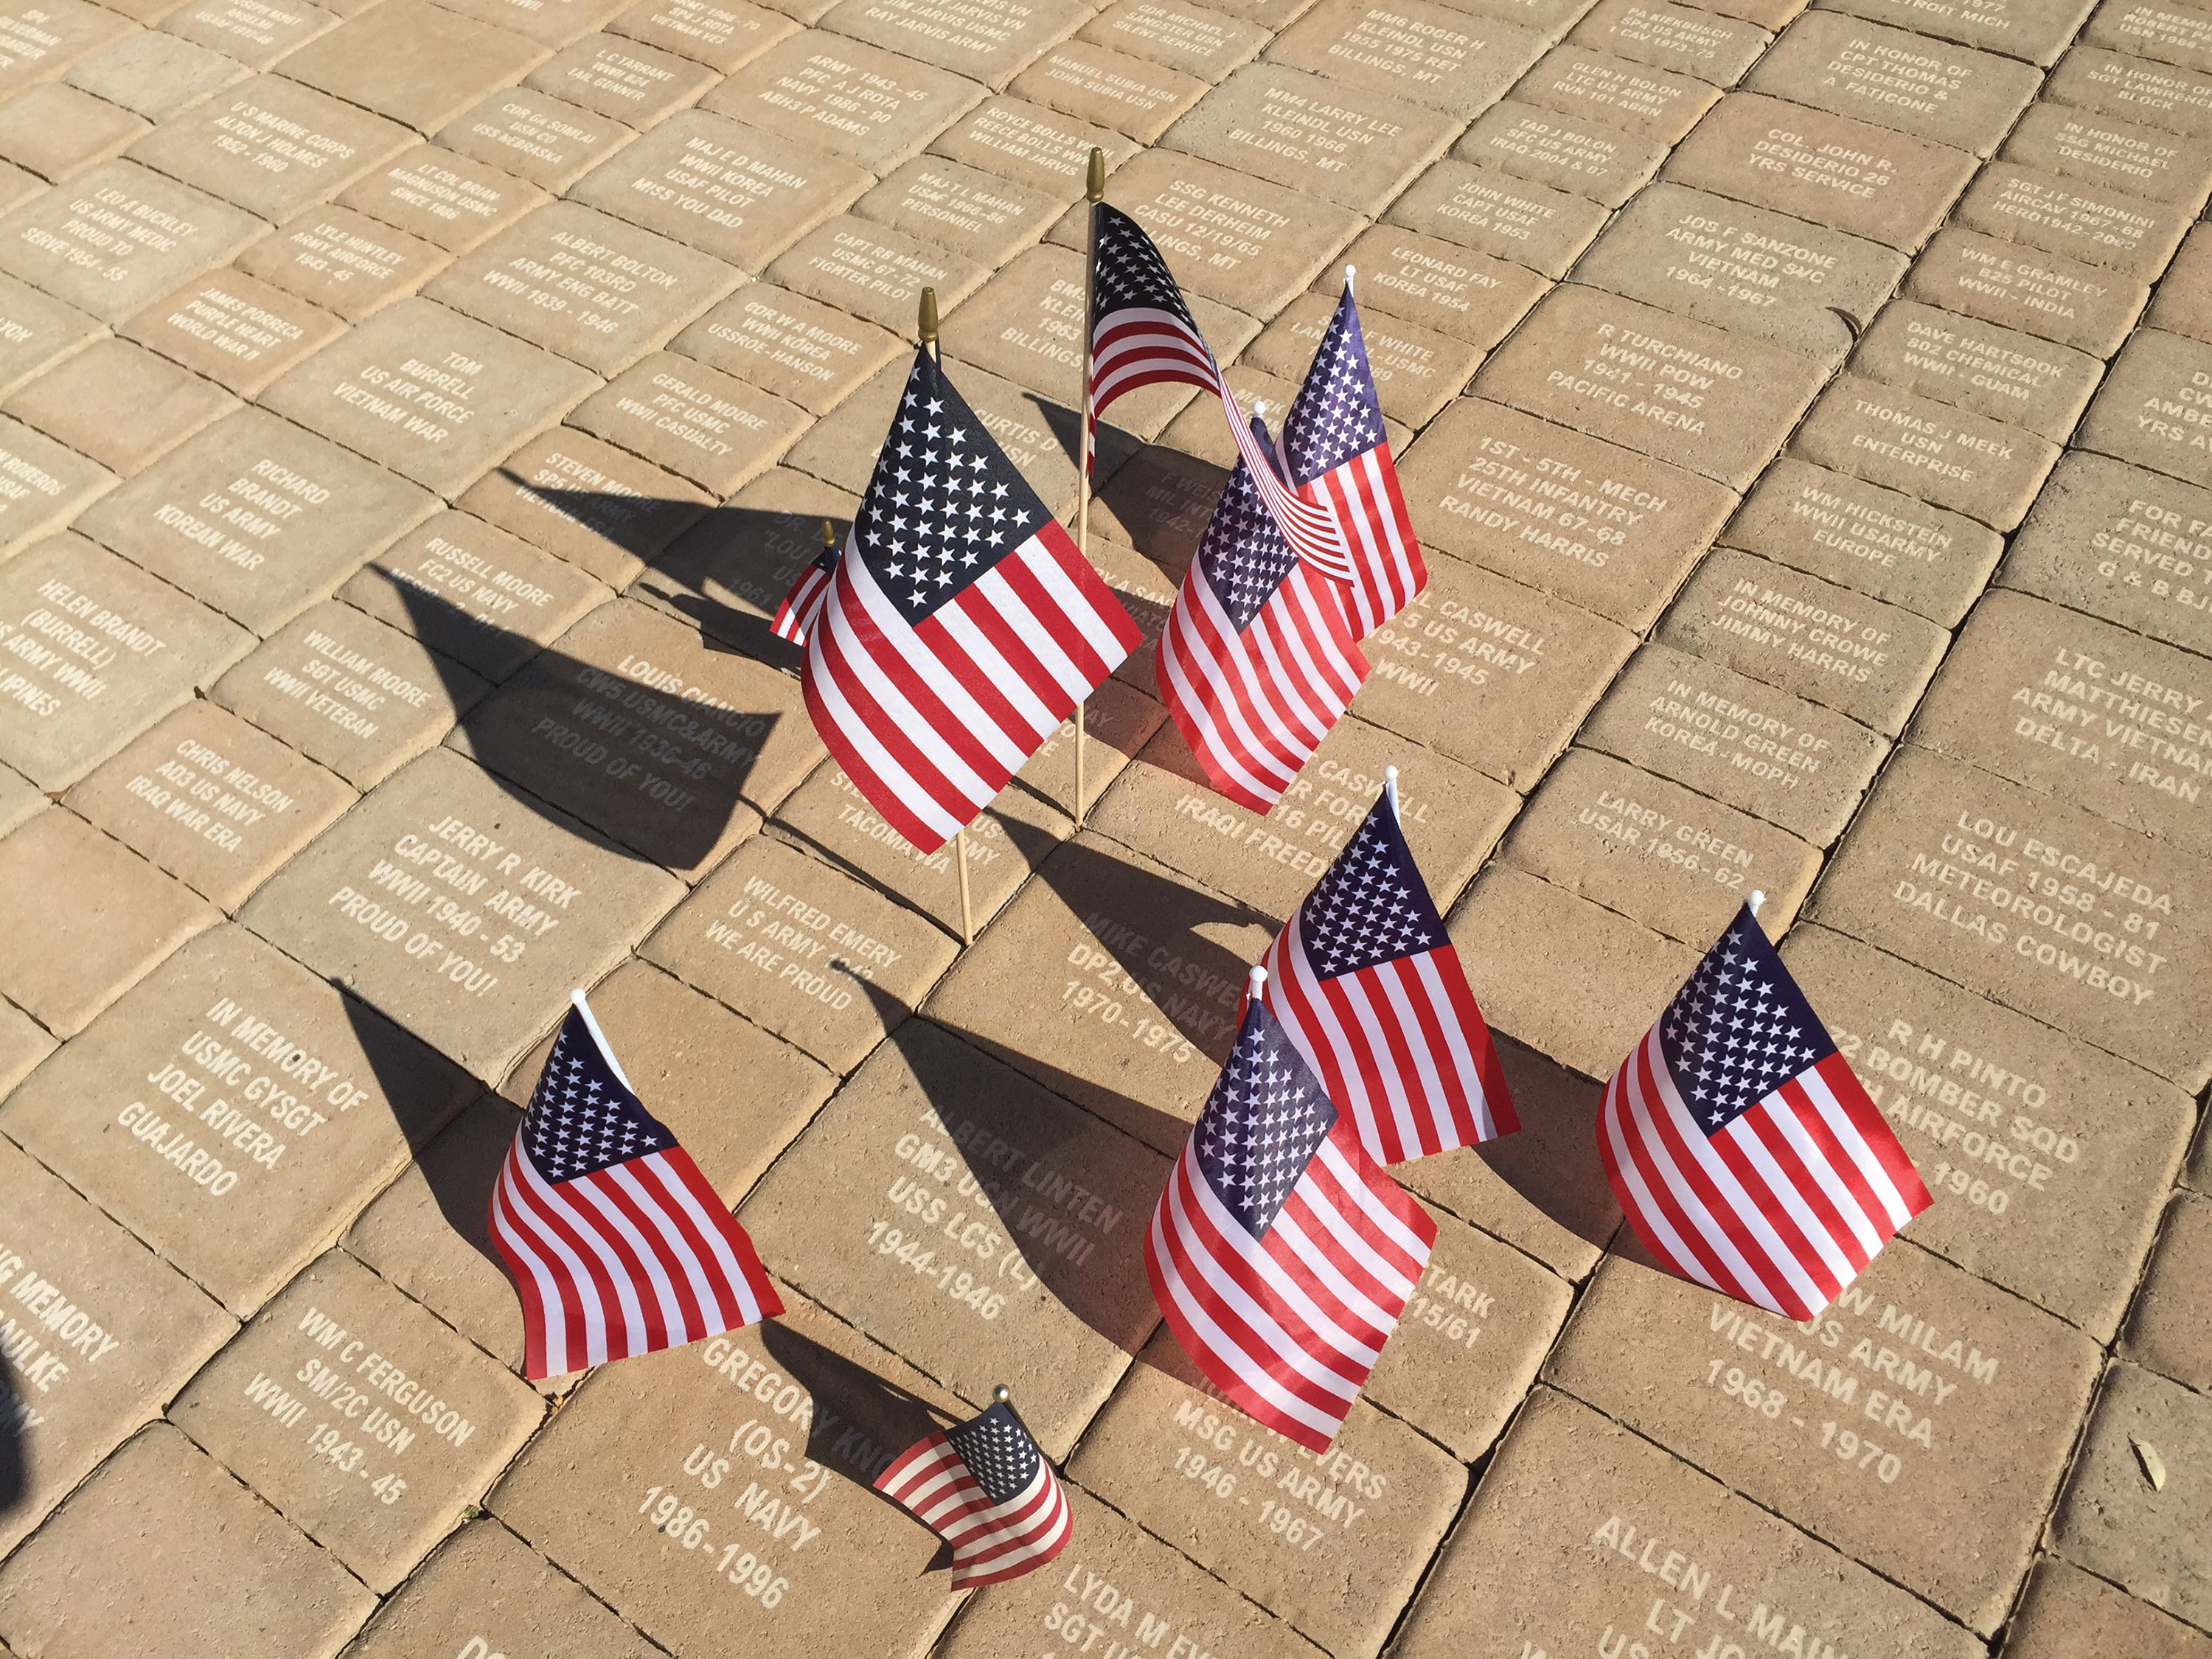 Pavers with flags